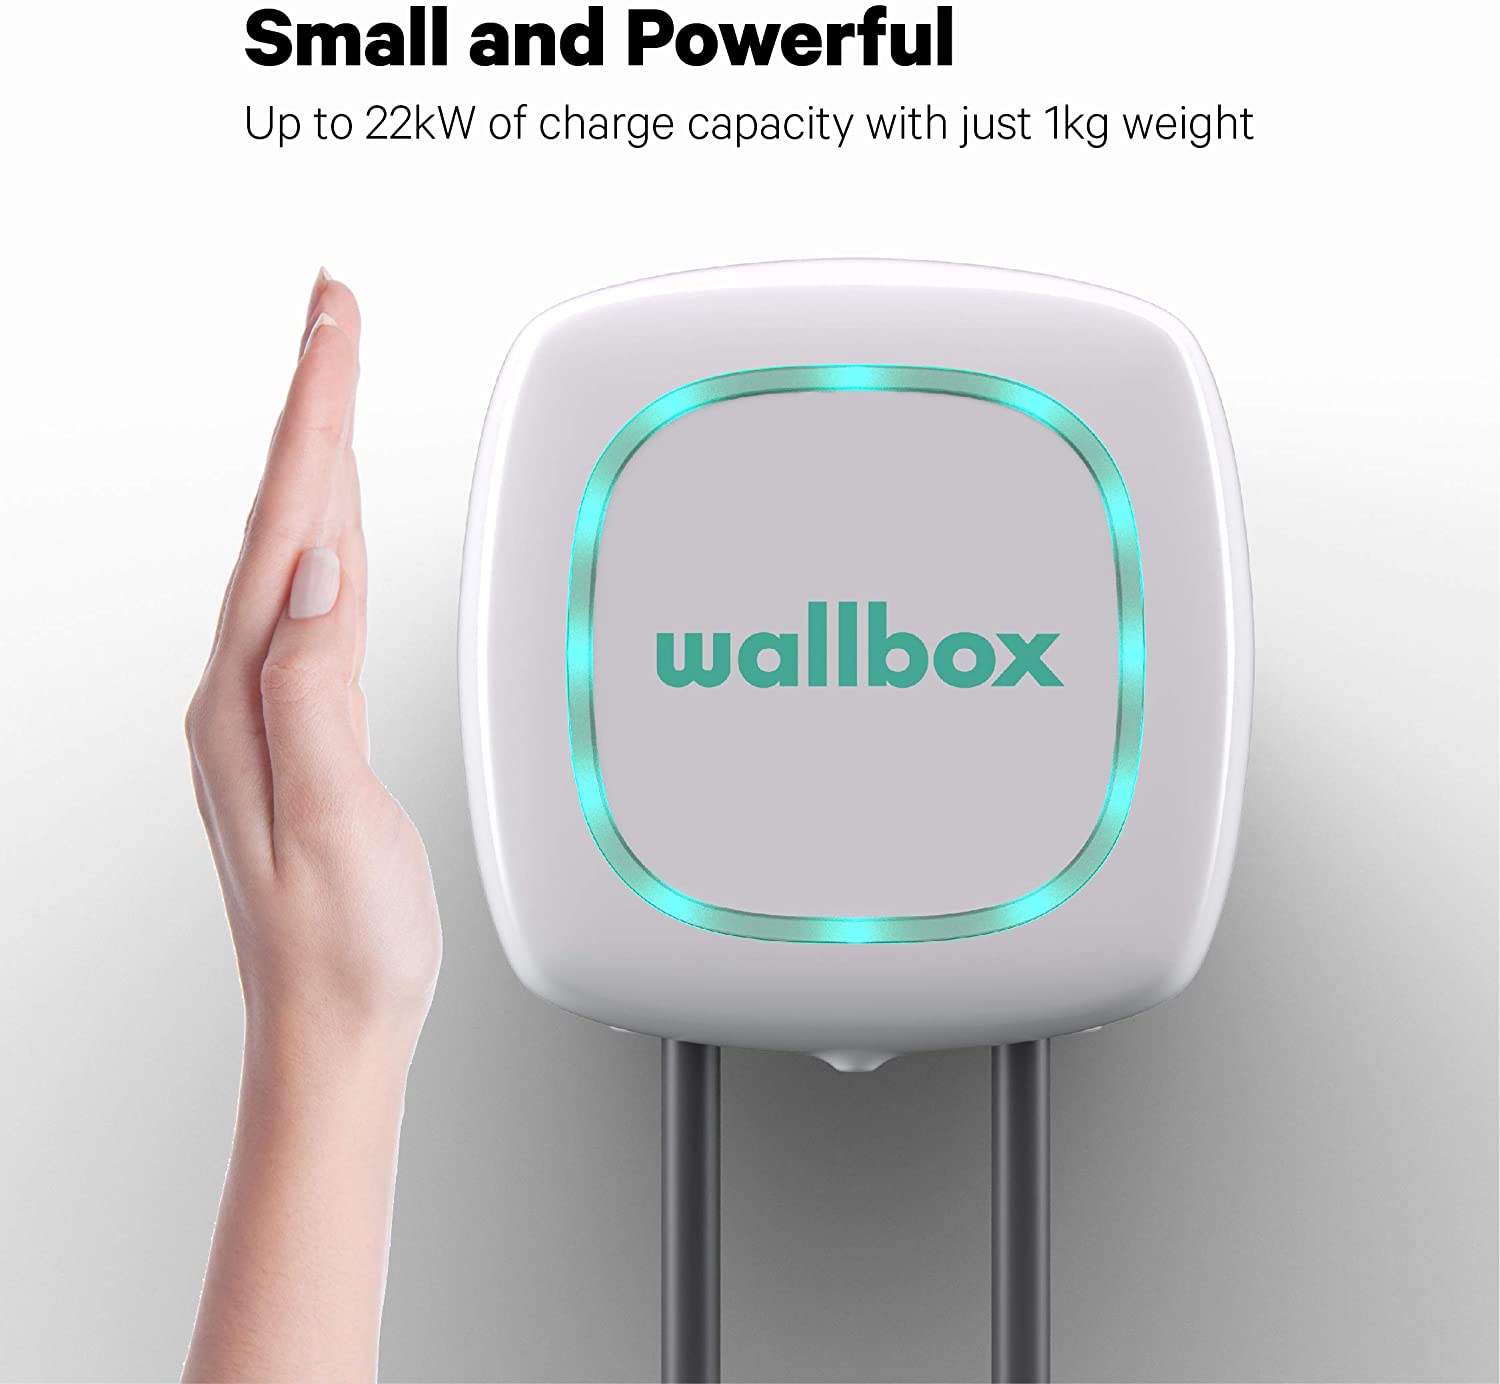 What installers are saying about the Wallbox Pulsar Plus